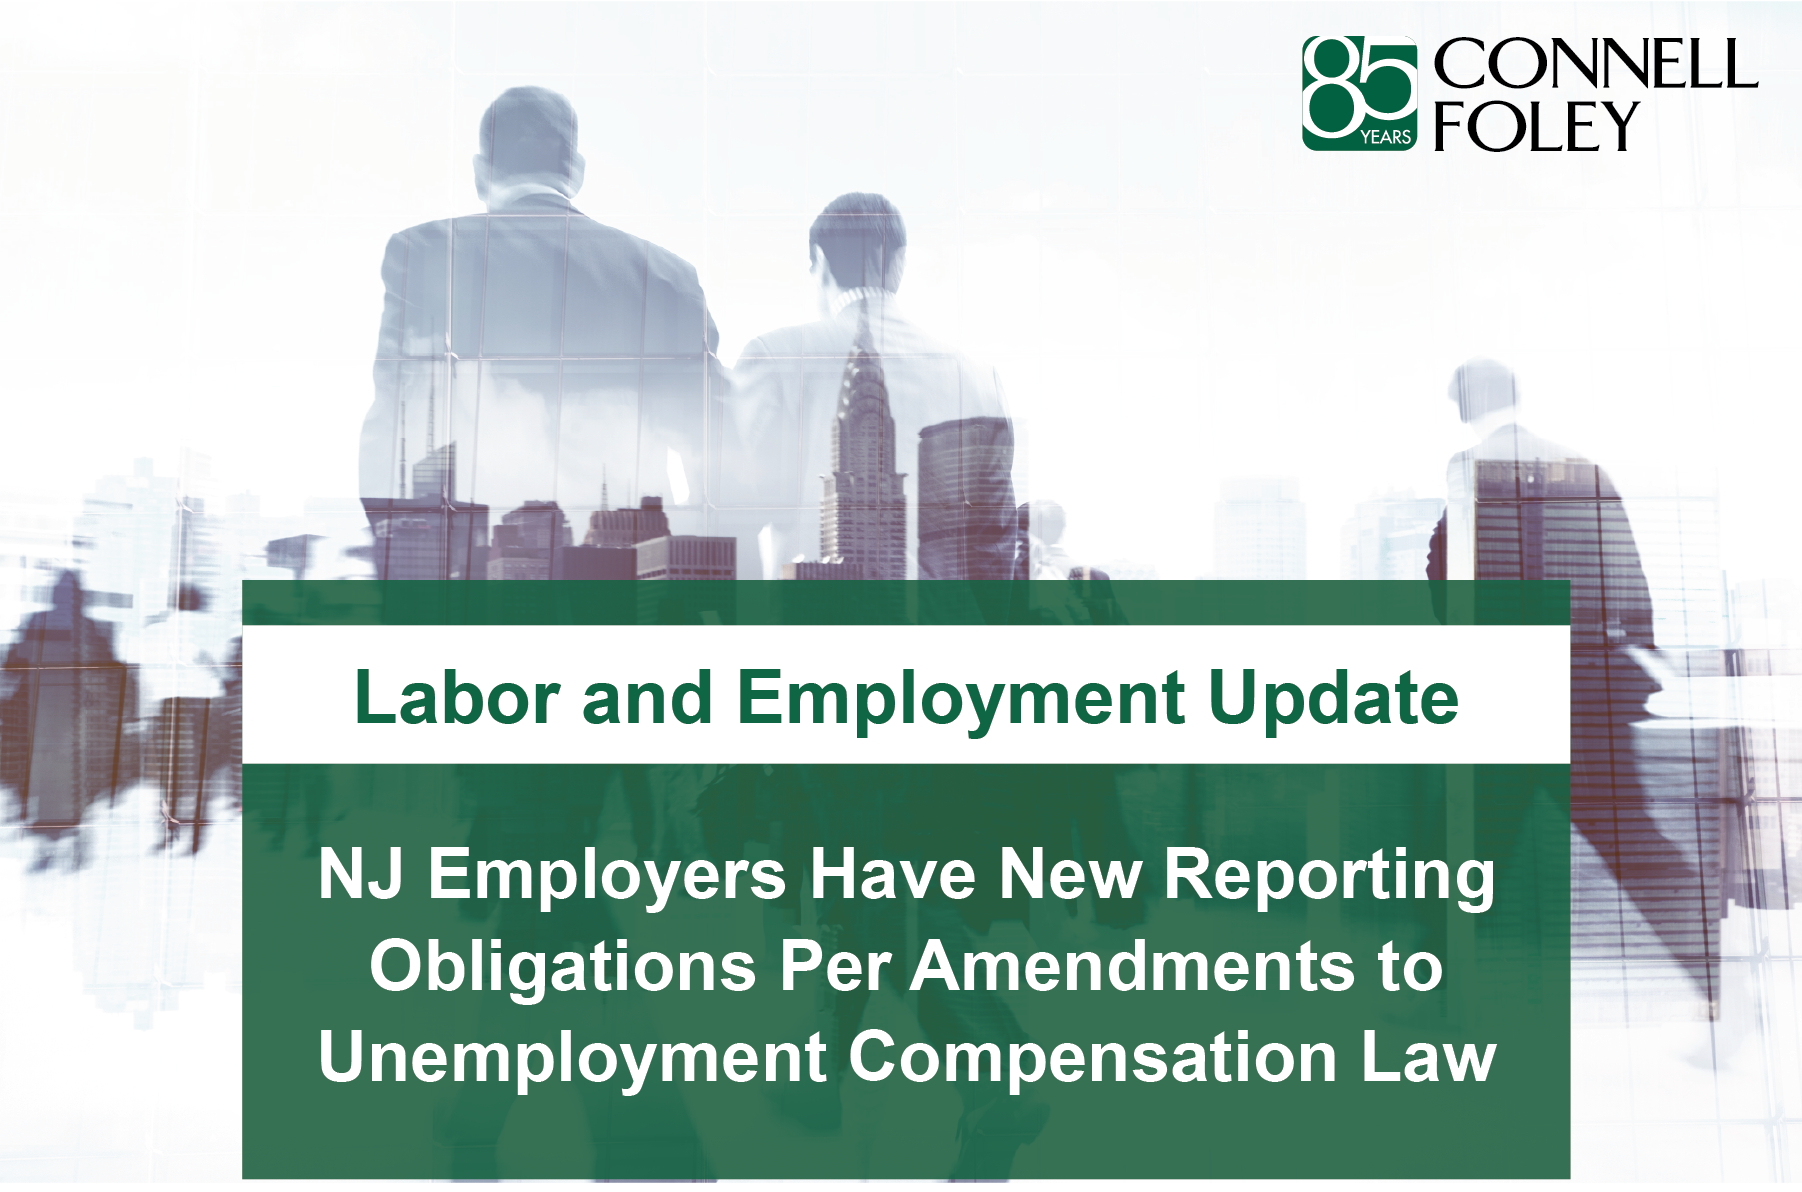 New Jersey Employers Have New Reporting Obligations Per Amendments to Unemployment Compensation Law